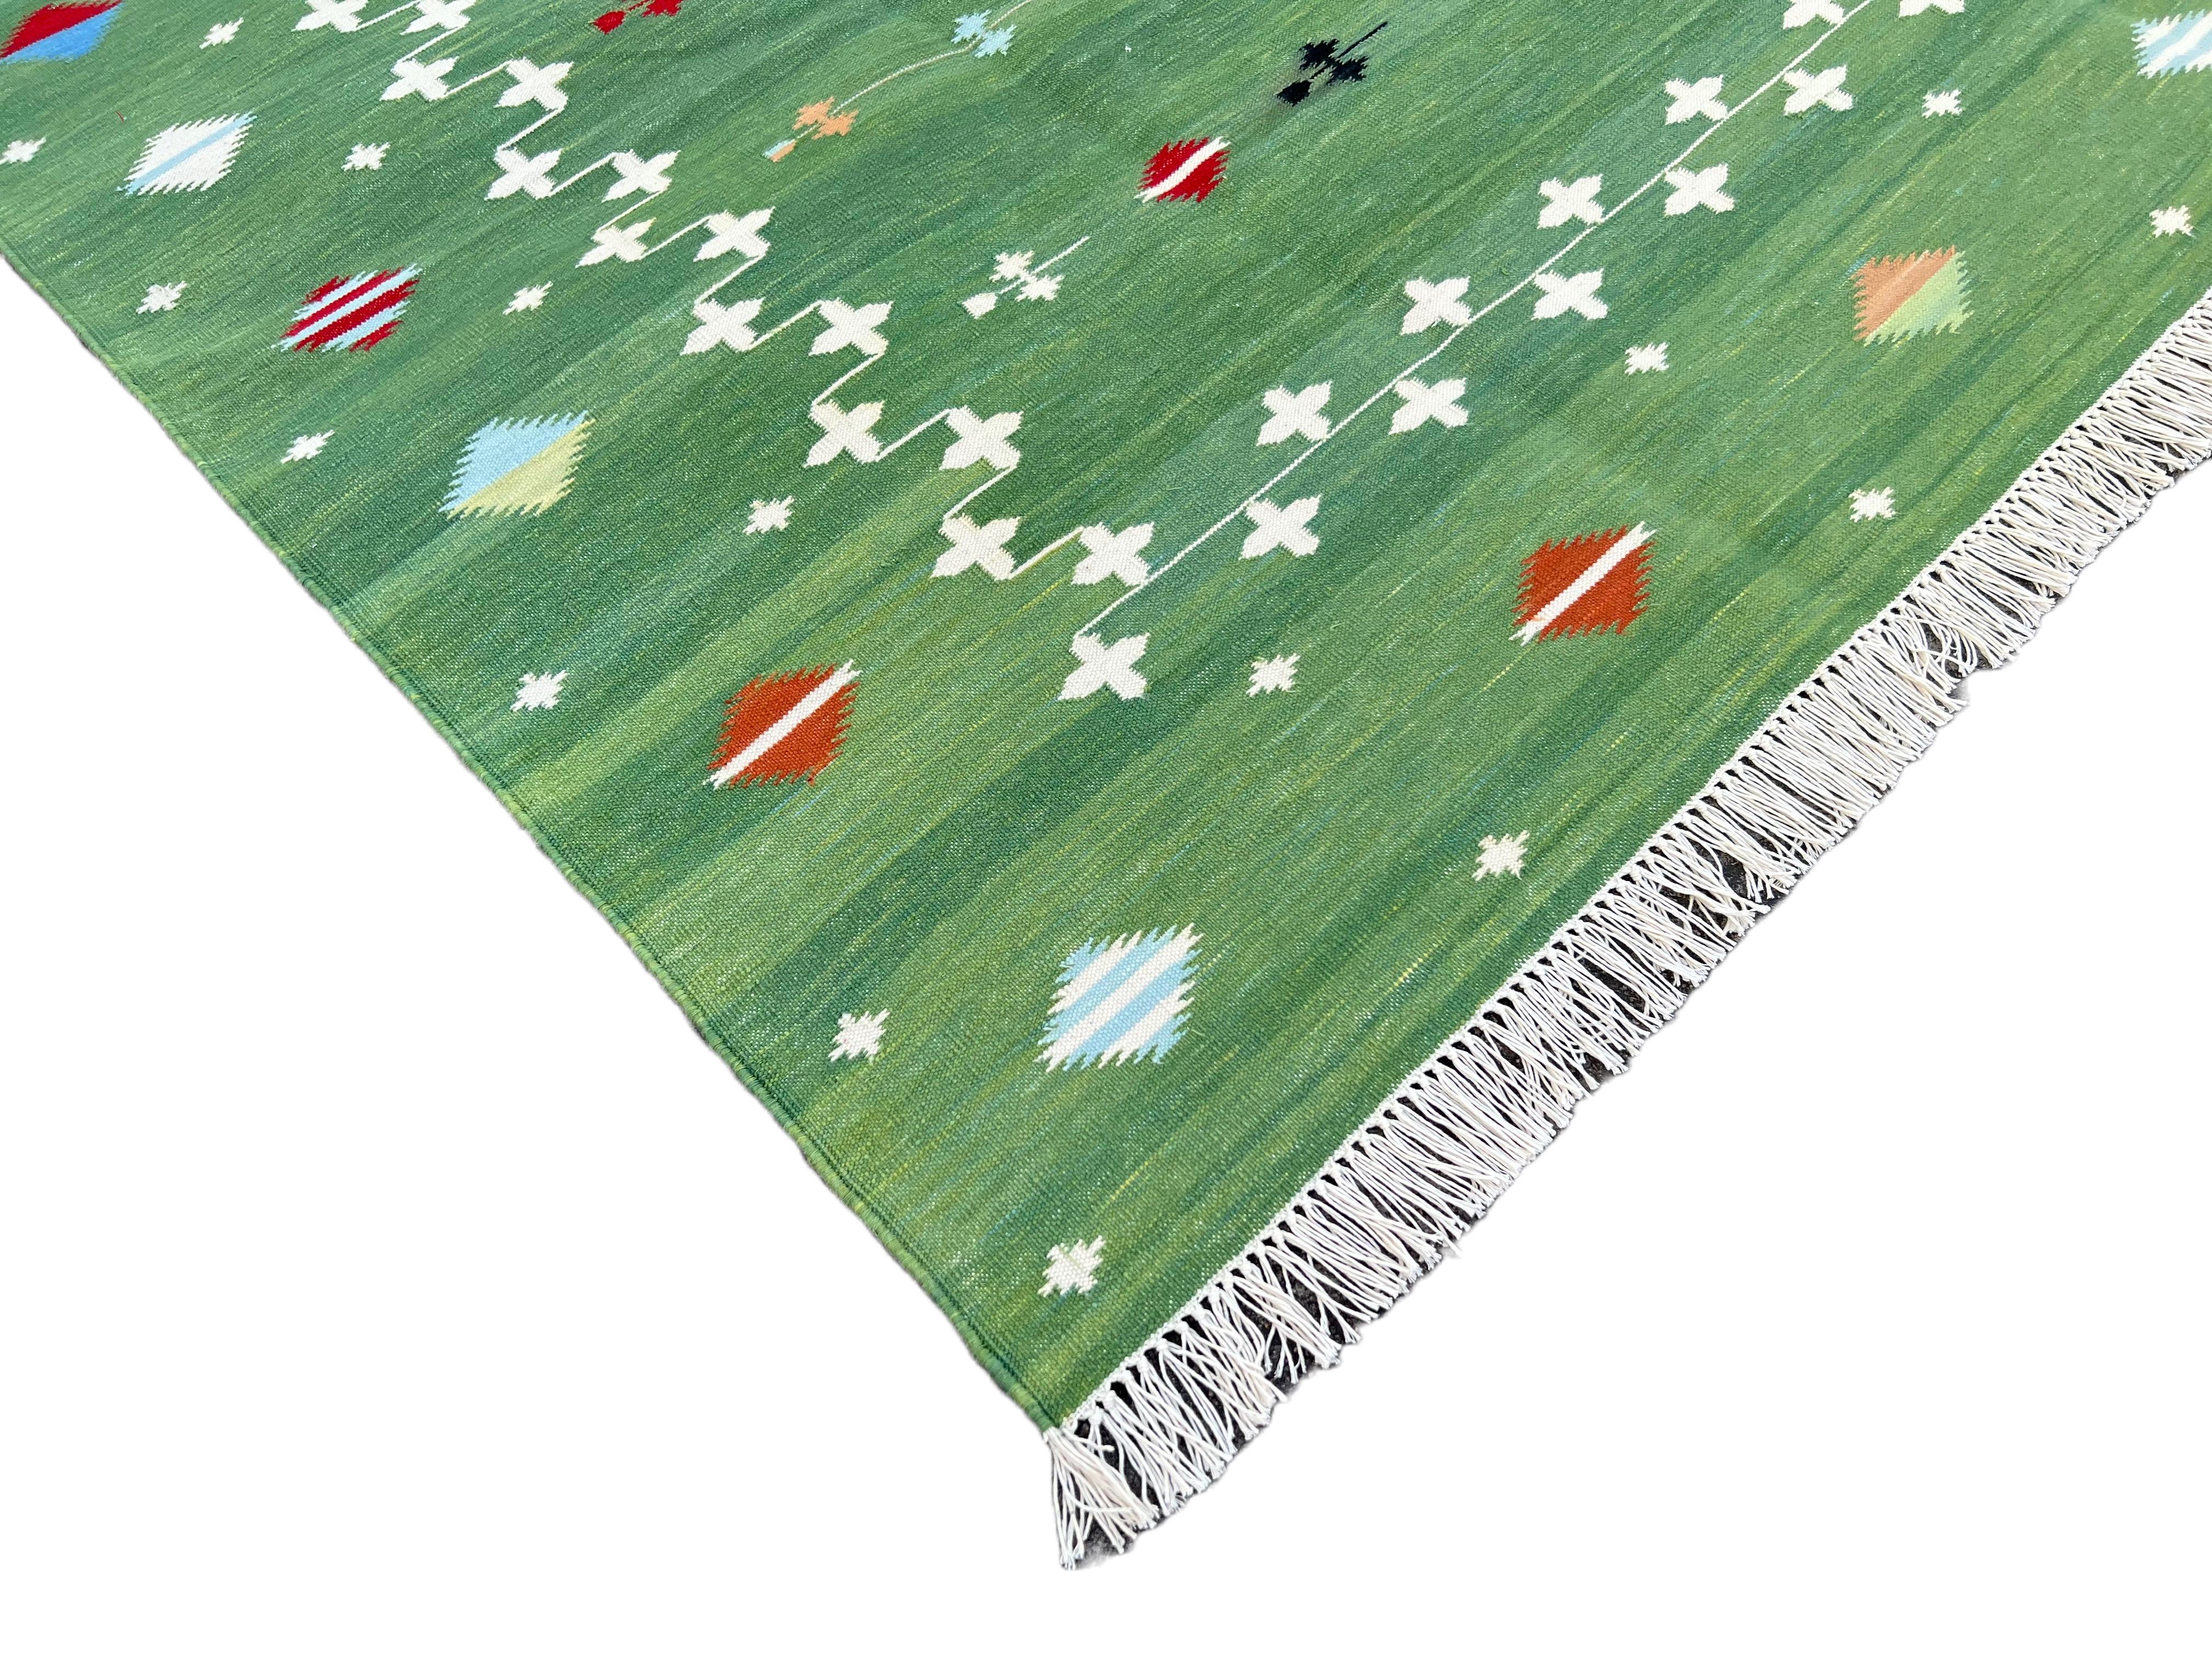 Cotton Vegetable Dyed Reversible Forest Green & White Indian Shooting Star Rug - 5'x7'
These special flat-weave dhurries are hand-woven with 15 ply 100% cotton yarn. Due to the special manufacturing techniques used to create our rugs, the size and